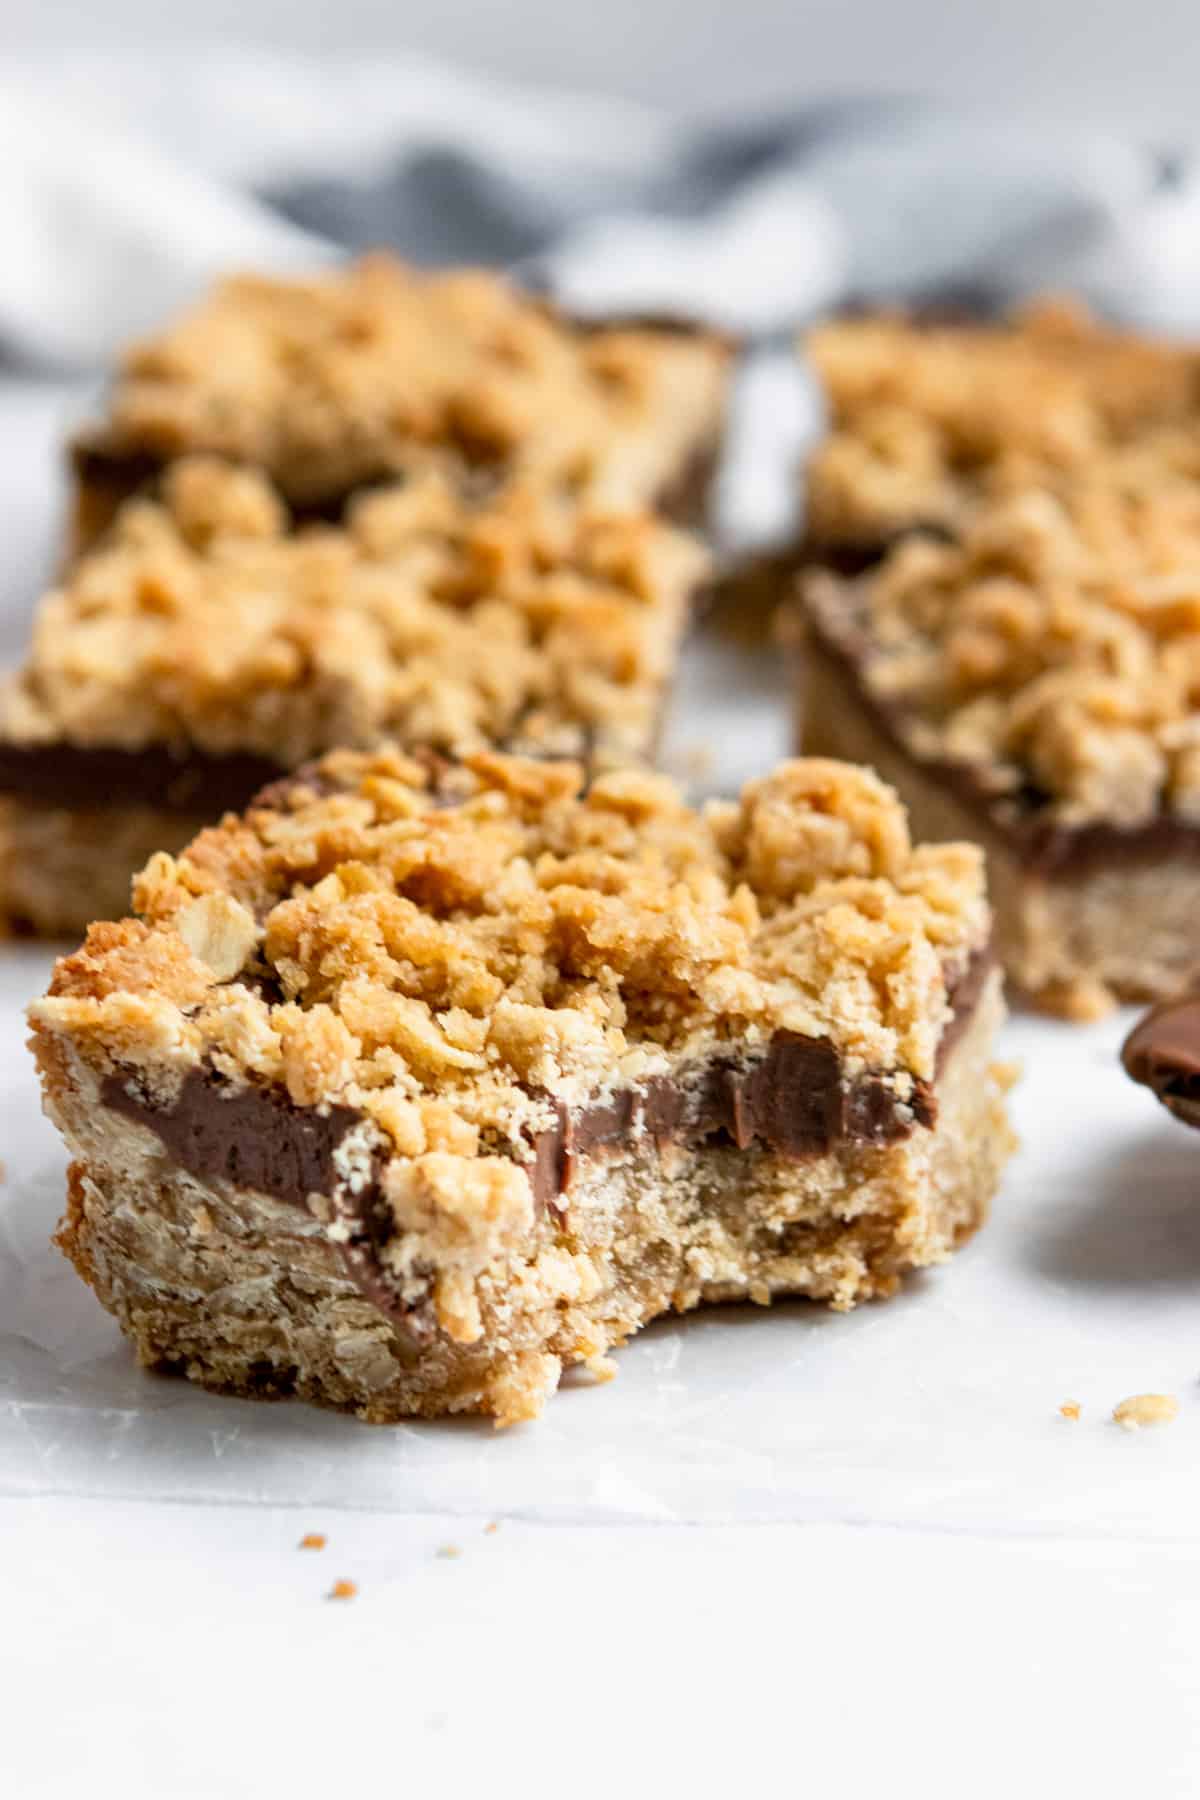 Nutella crumble bars on parchment paper.